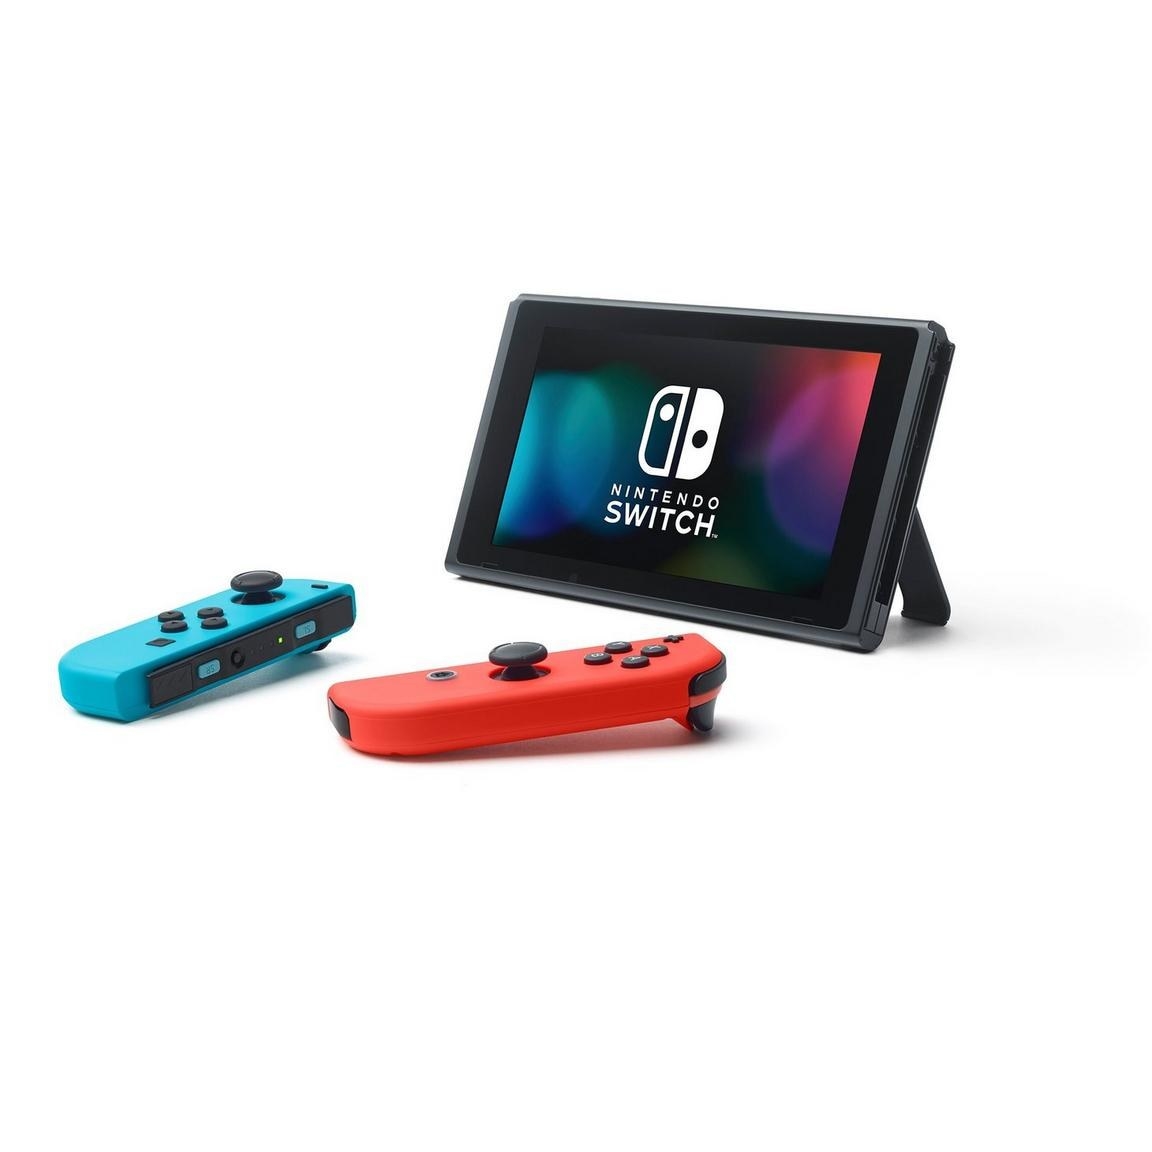 The switch console